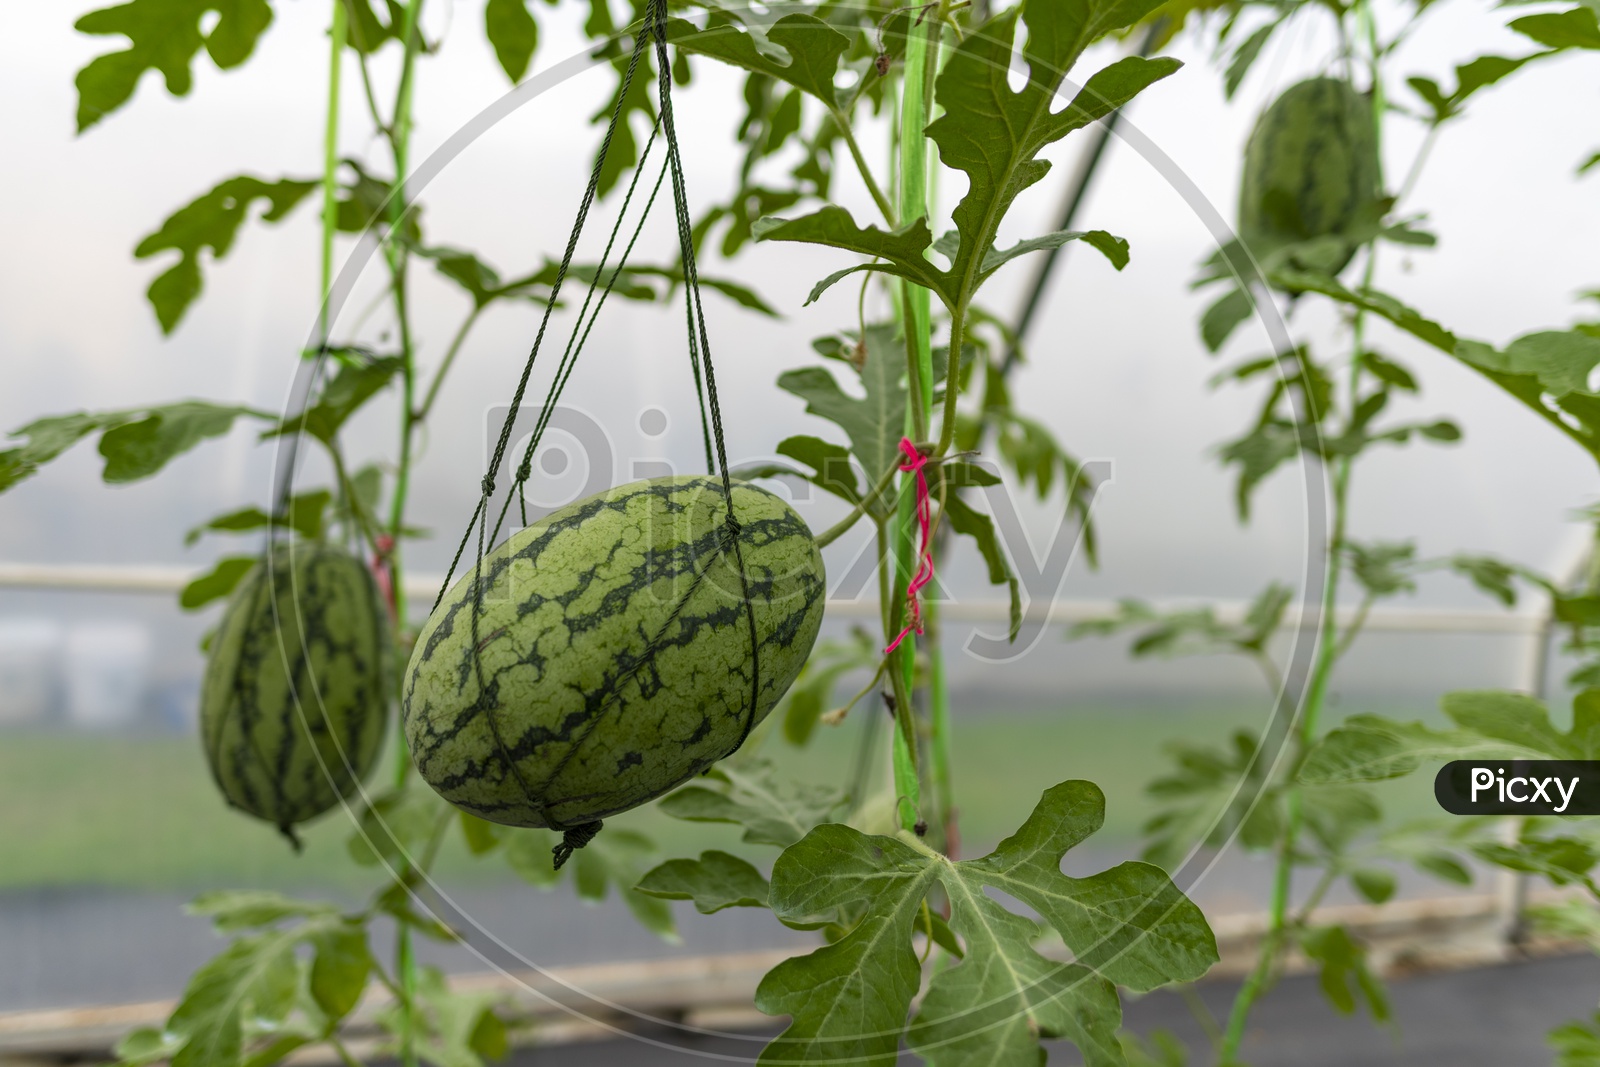 Agricultural industry of watermelon cultivation in greenhouses